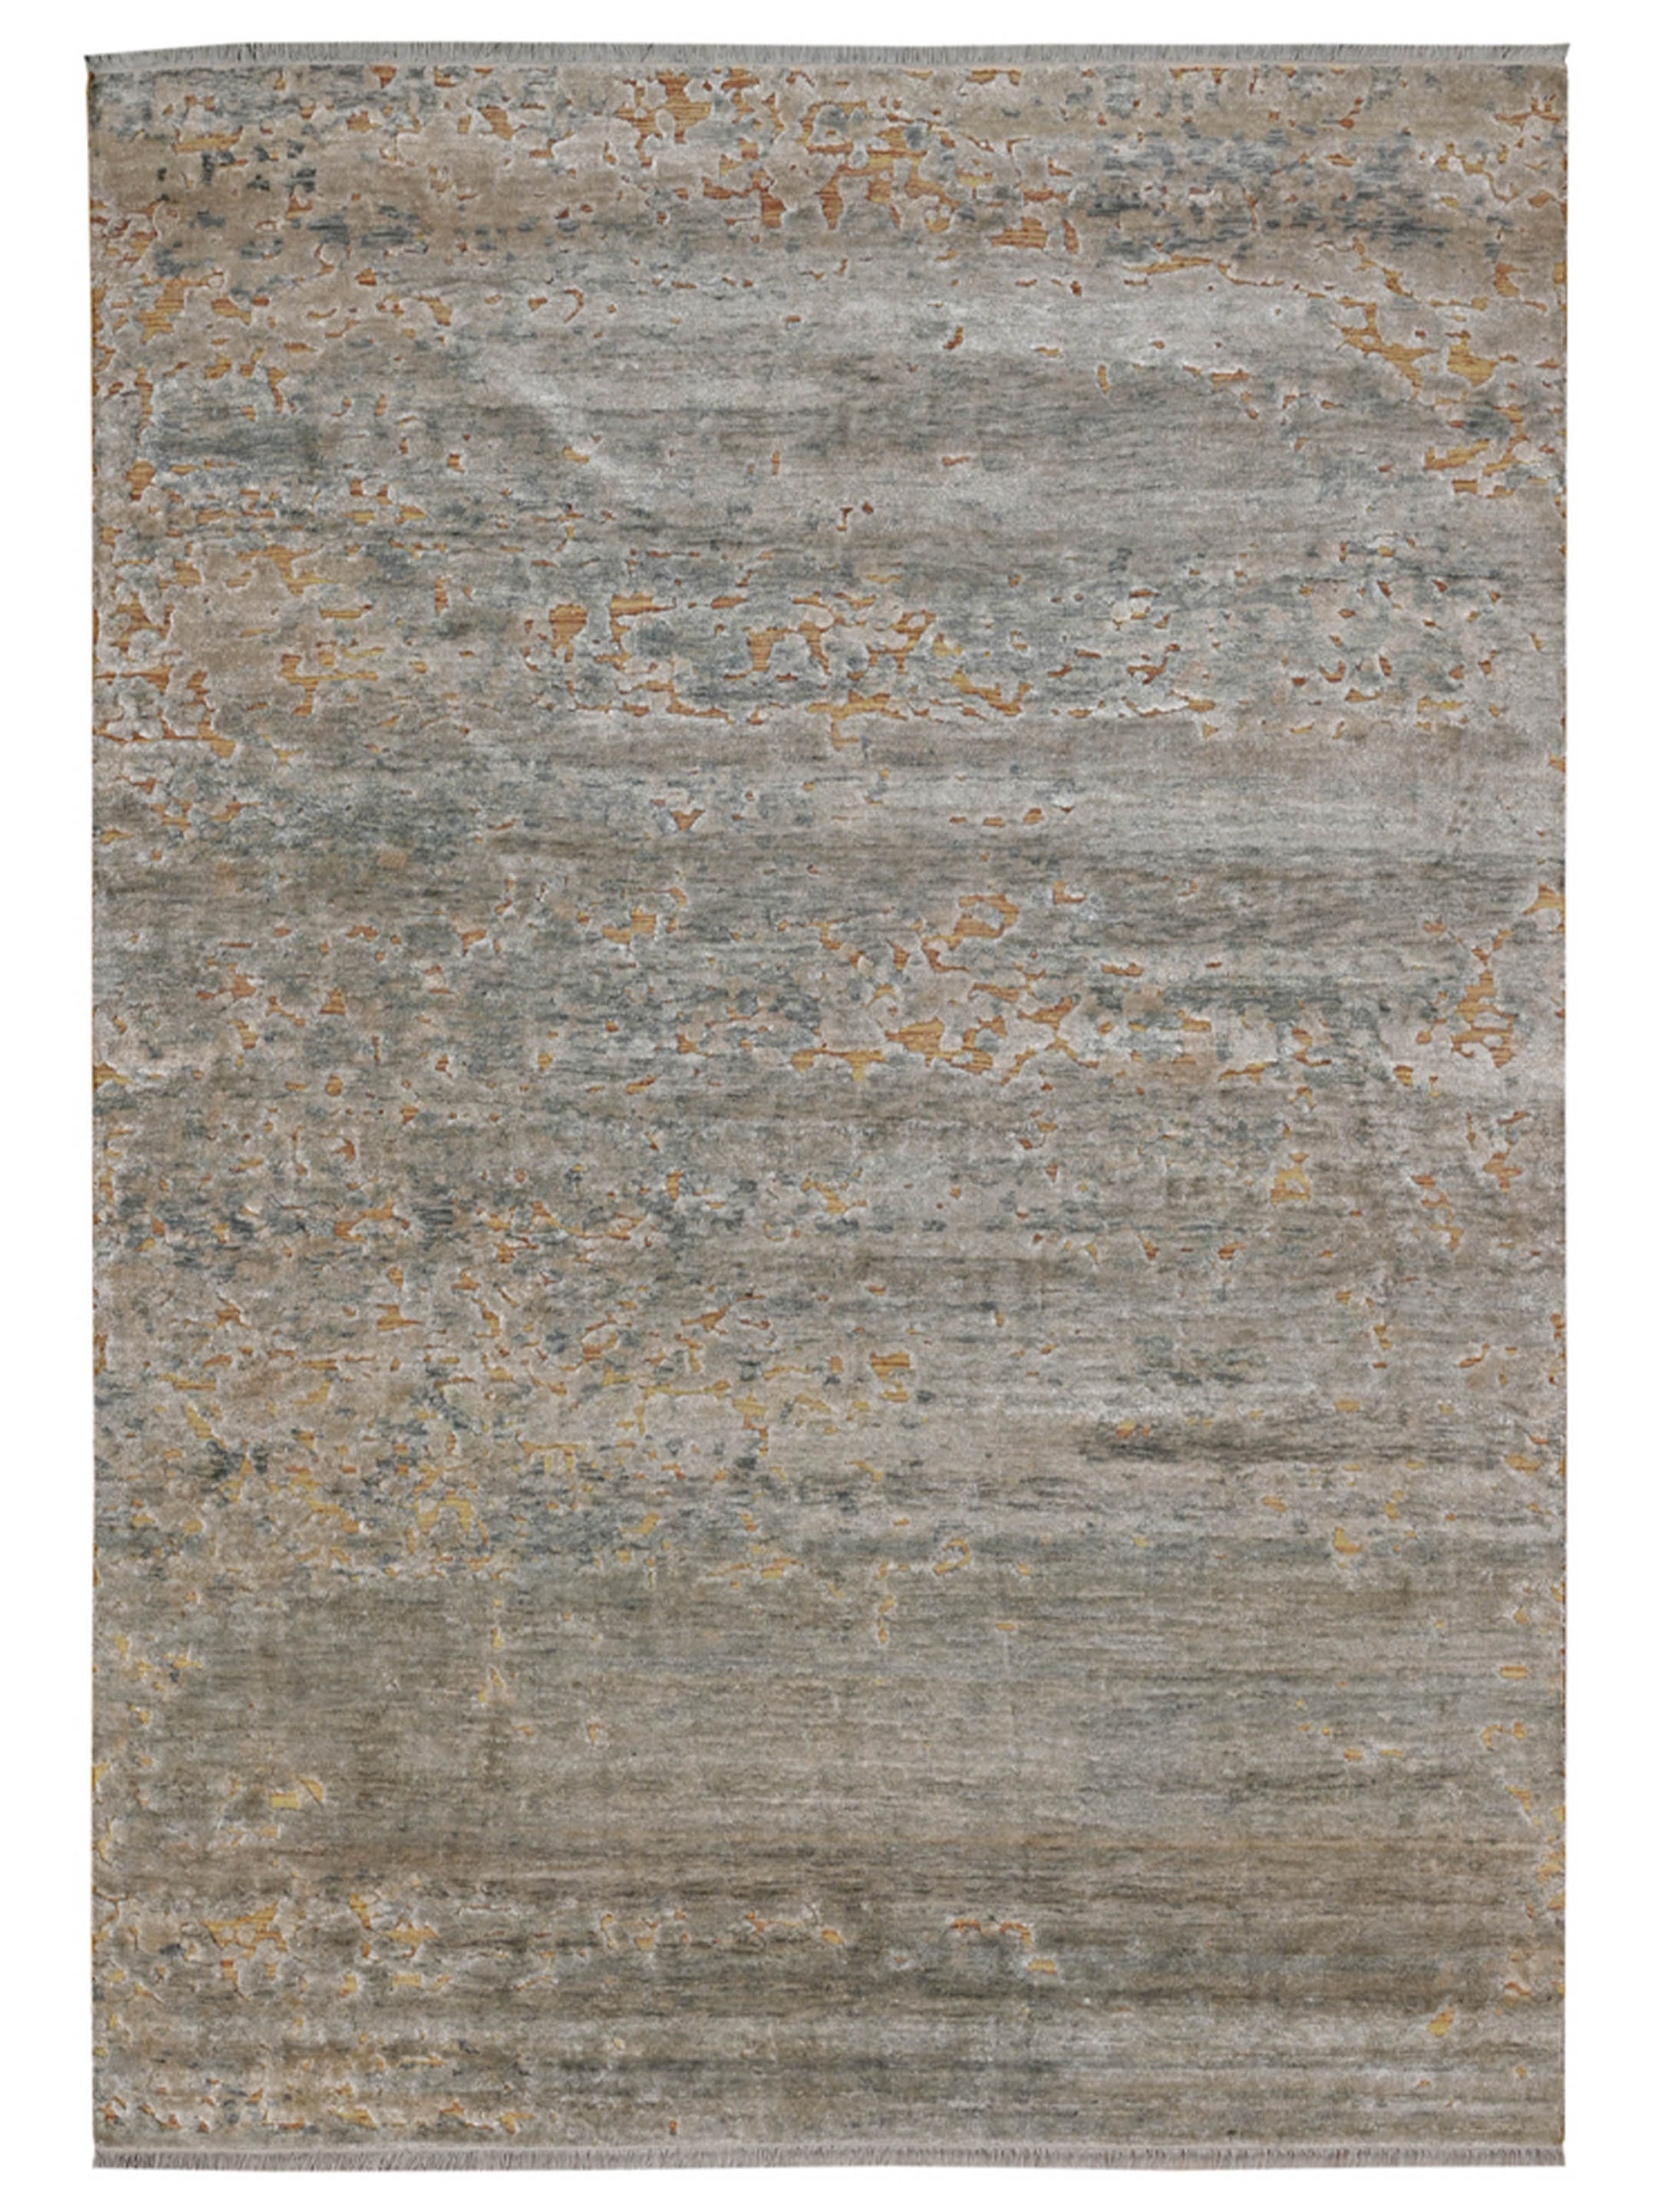 Artisan Mary 3D-2 Gold Contemporary Knotted Rug